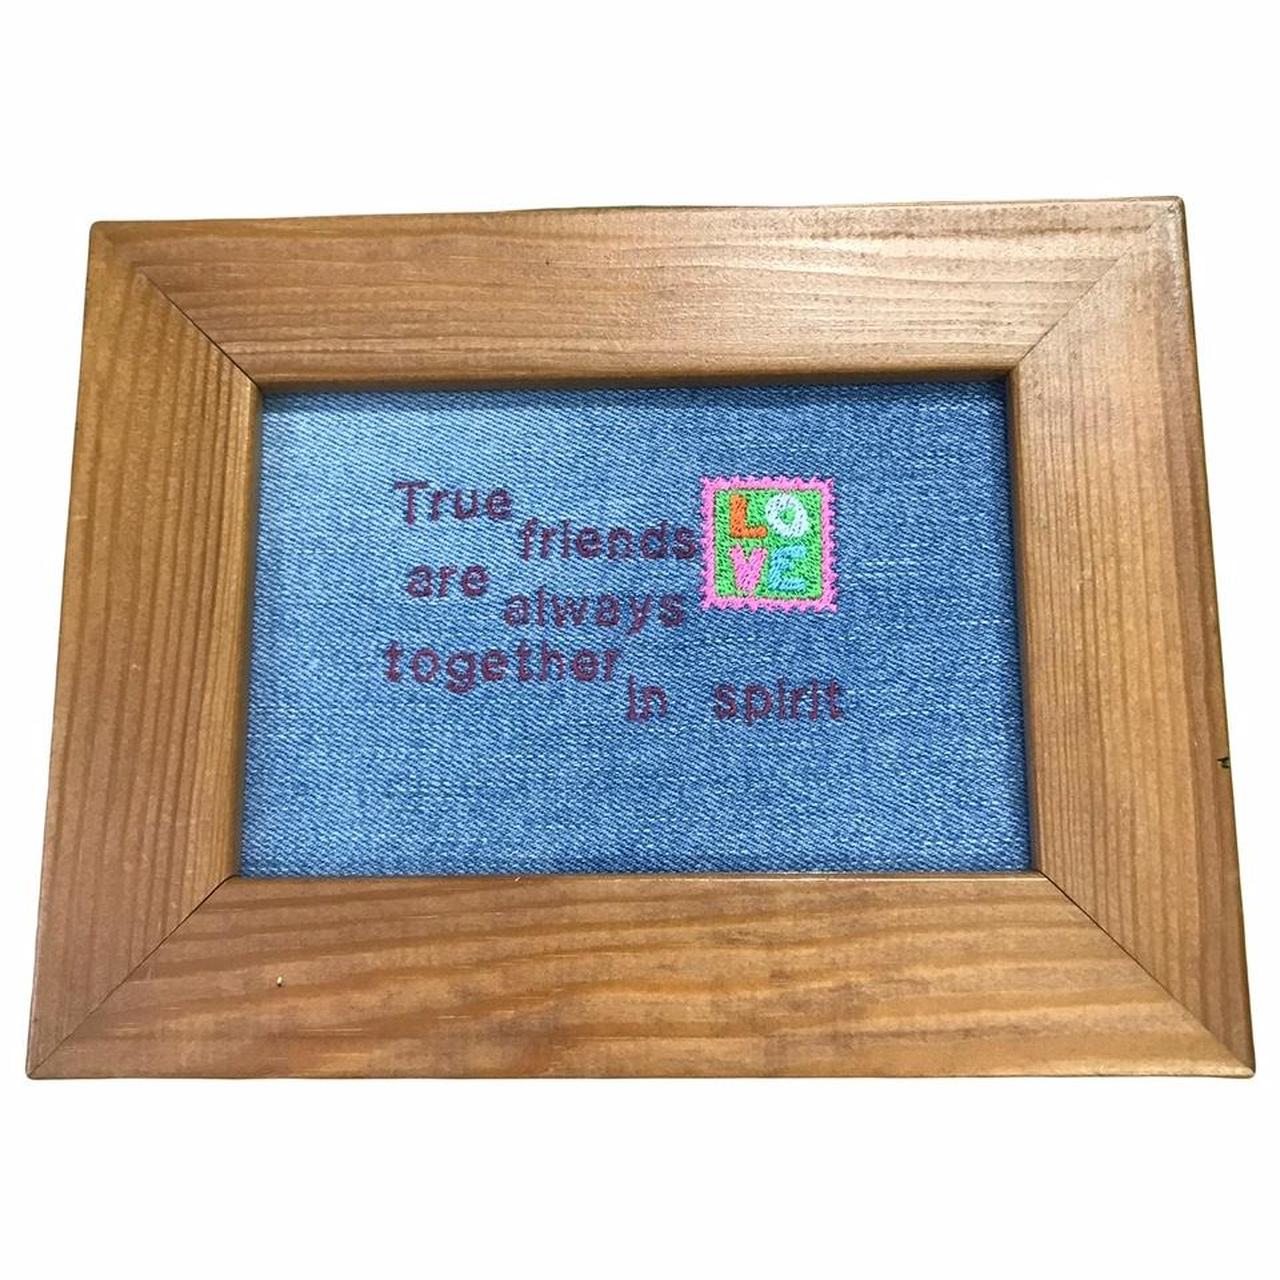 Anne of Green Gables Embroidered Framed Quote -  Reworked Fabric - Vintage Frame